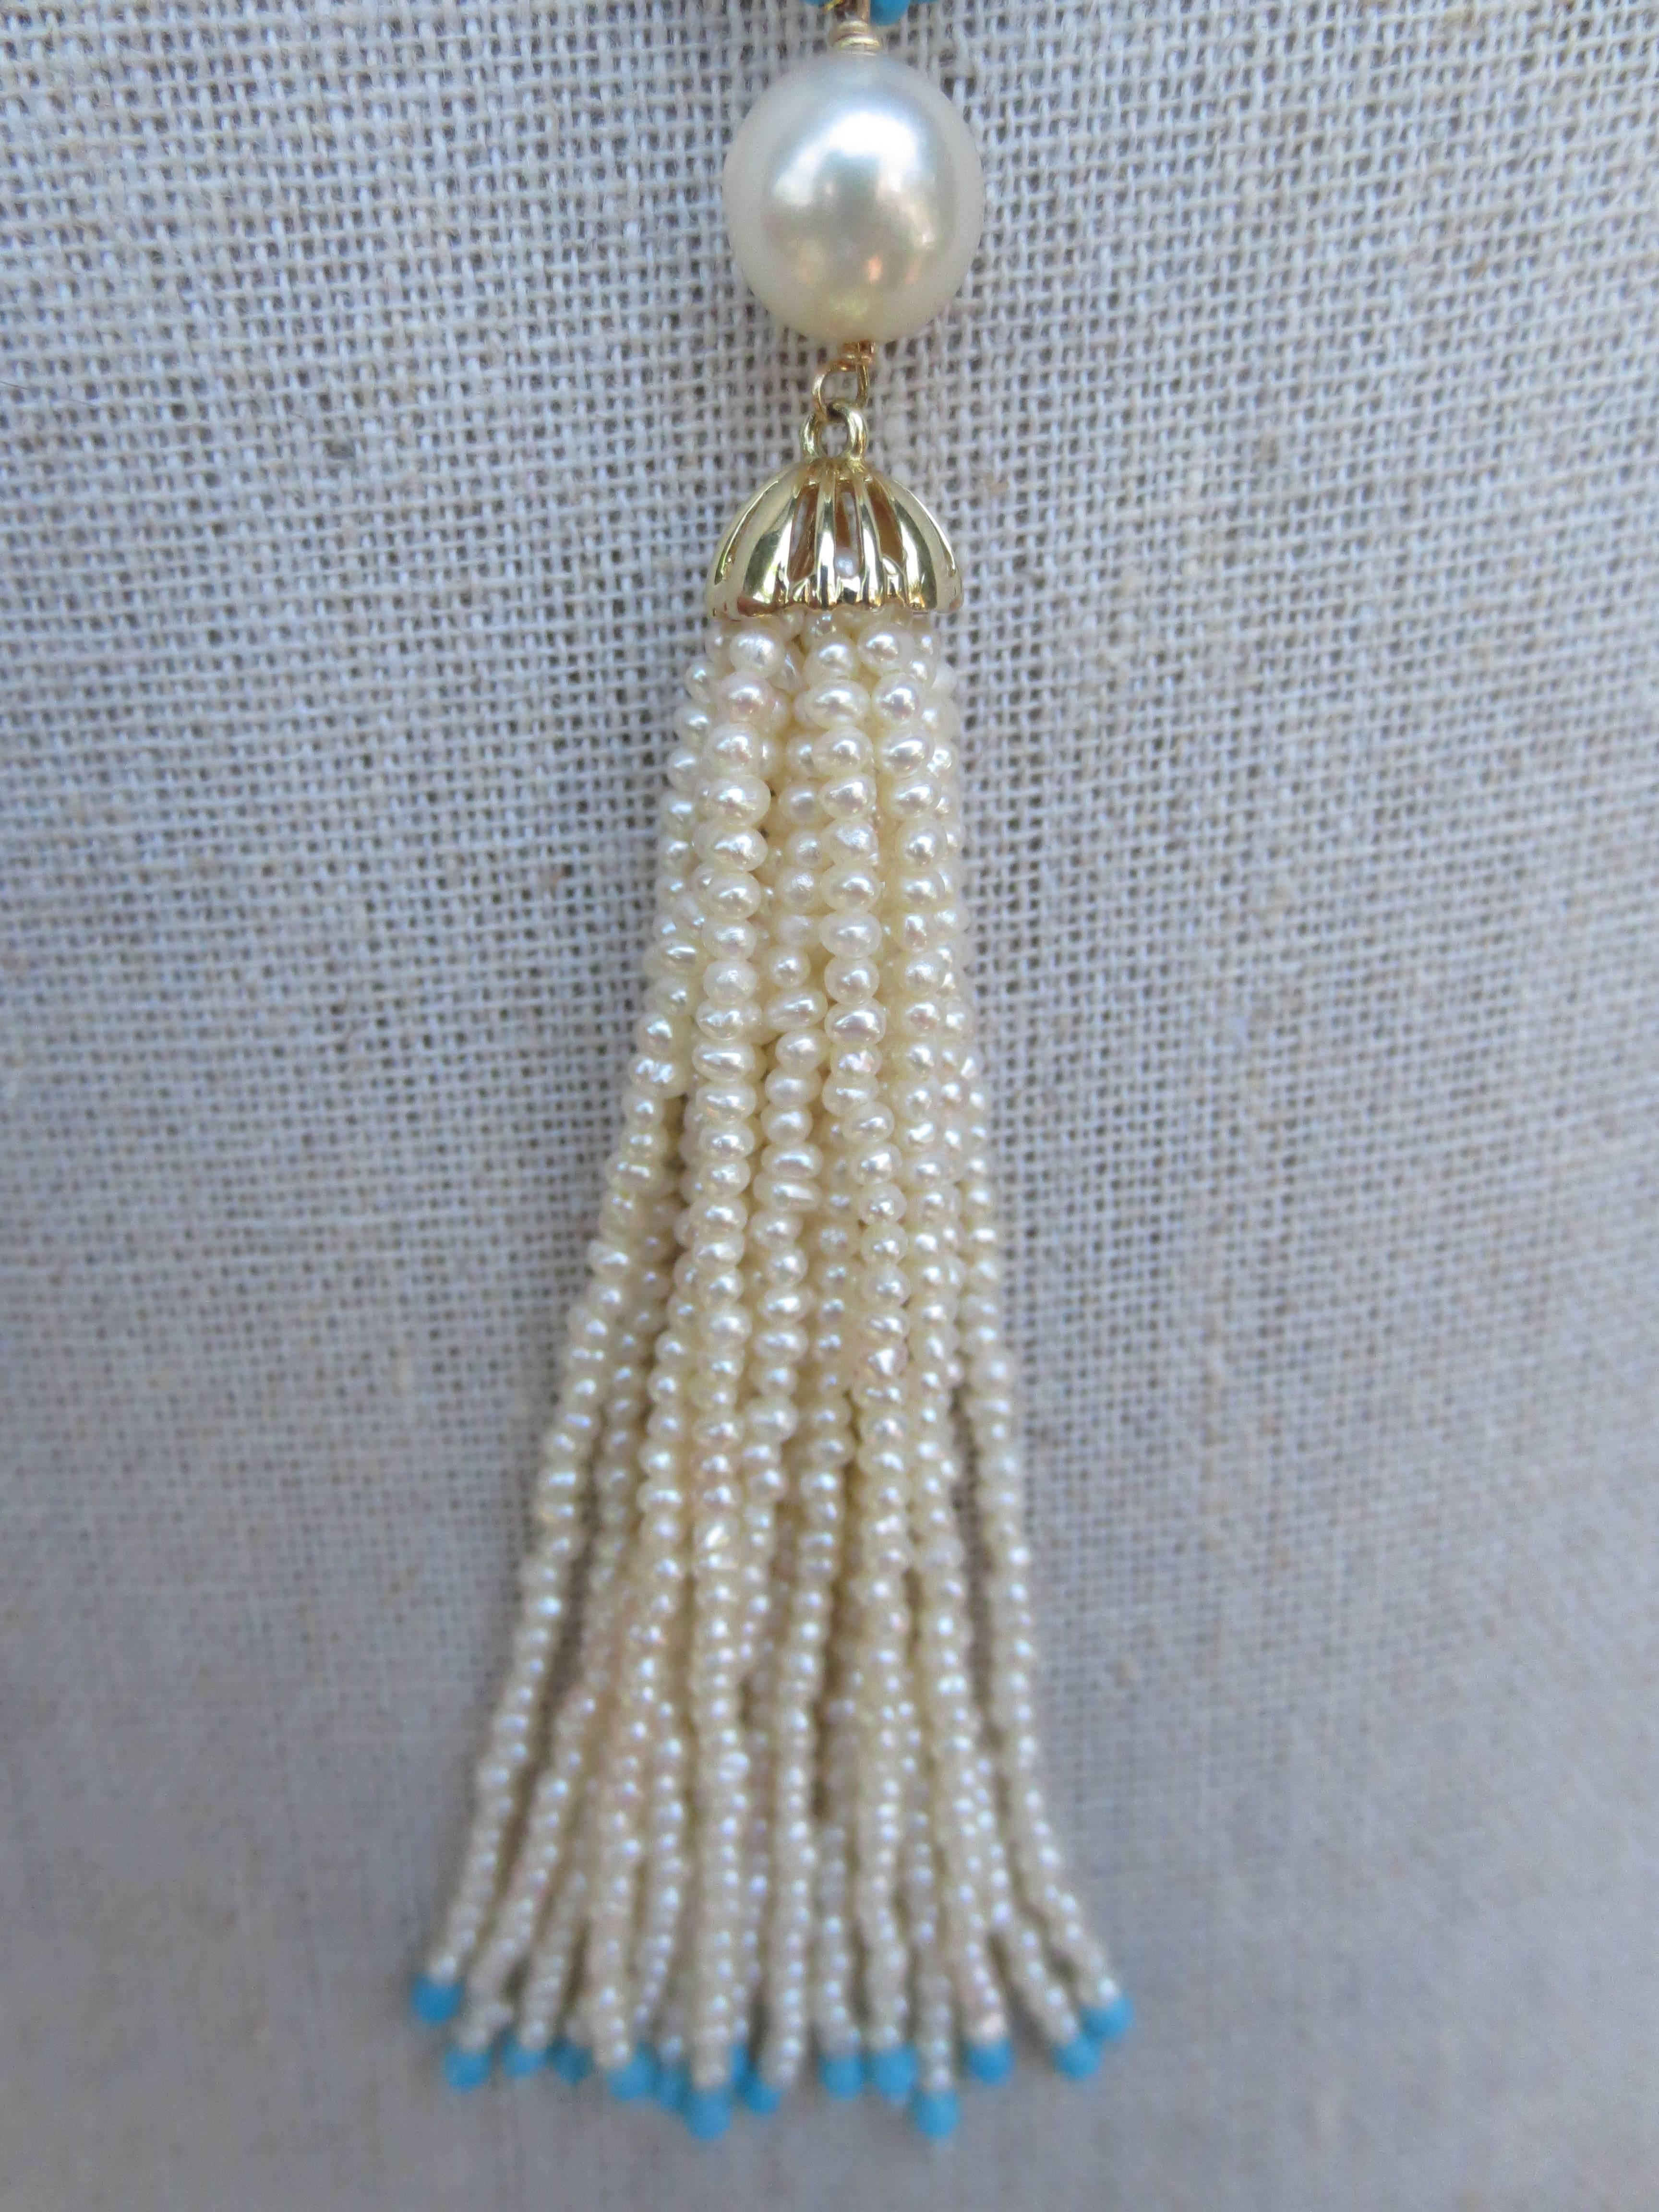  Marina J Woven Pearl & Turquoise Bead Long Sautoir with Pearl and Gold Tassels  In New Condition For Sale In Los Angeles, CA